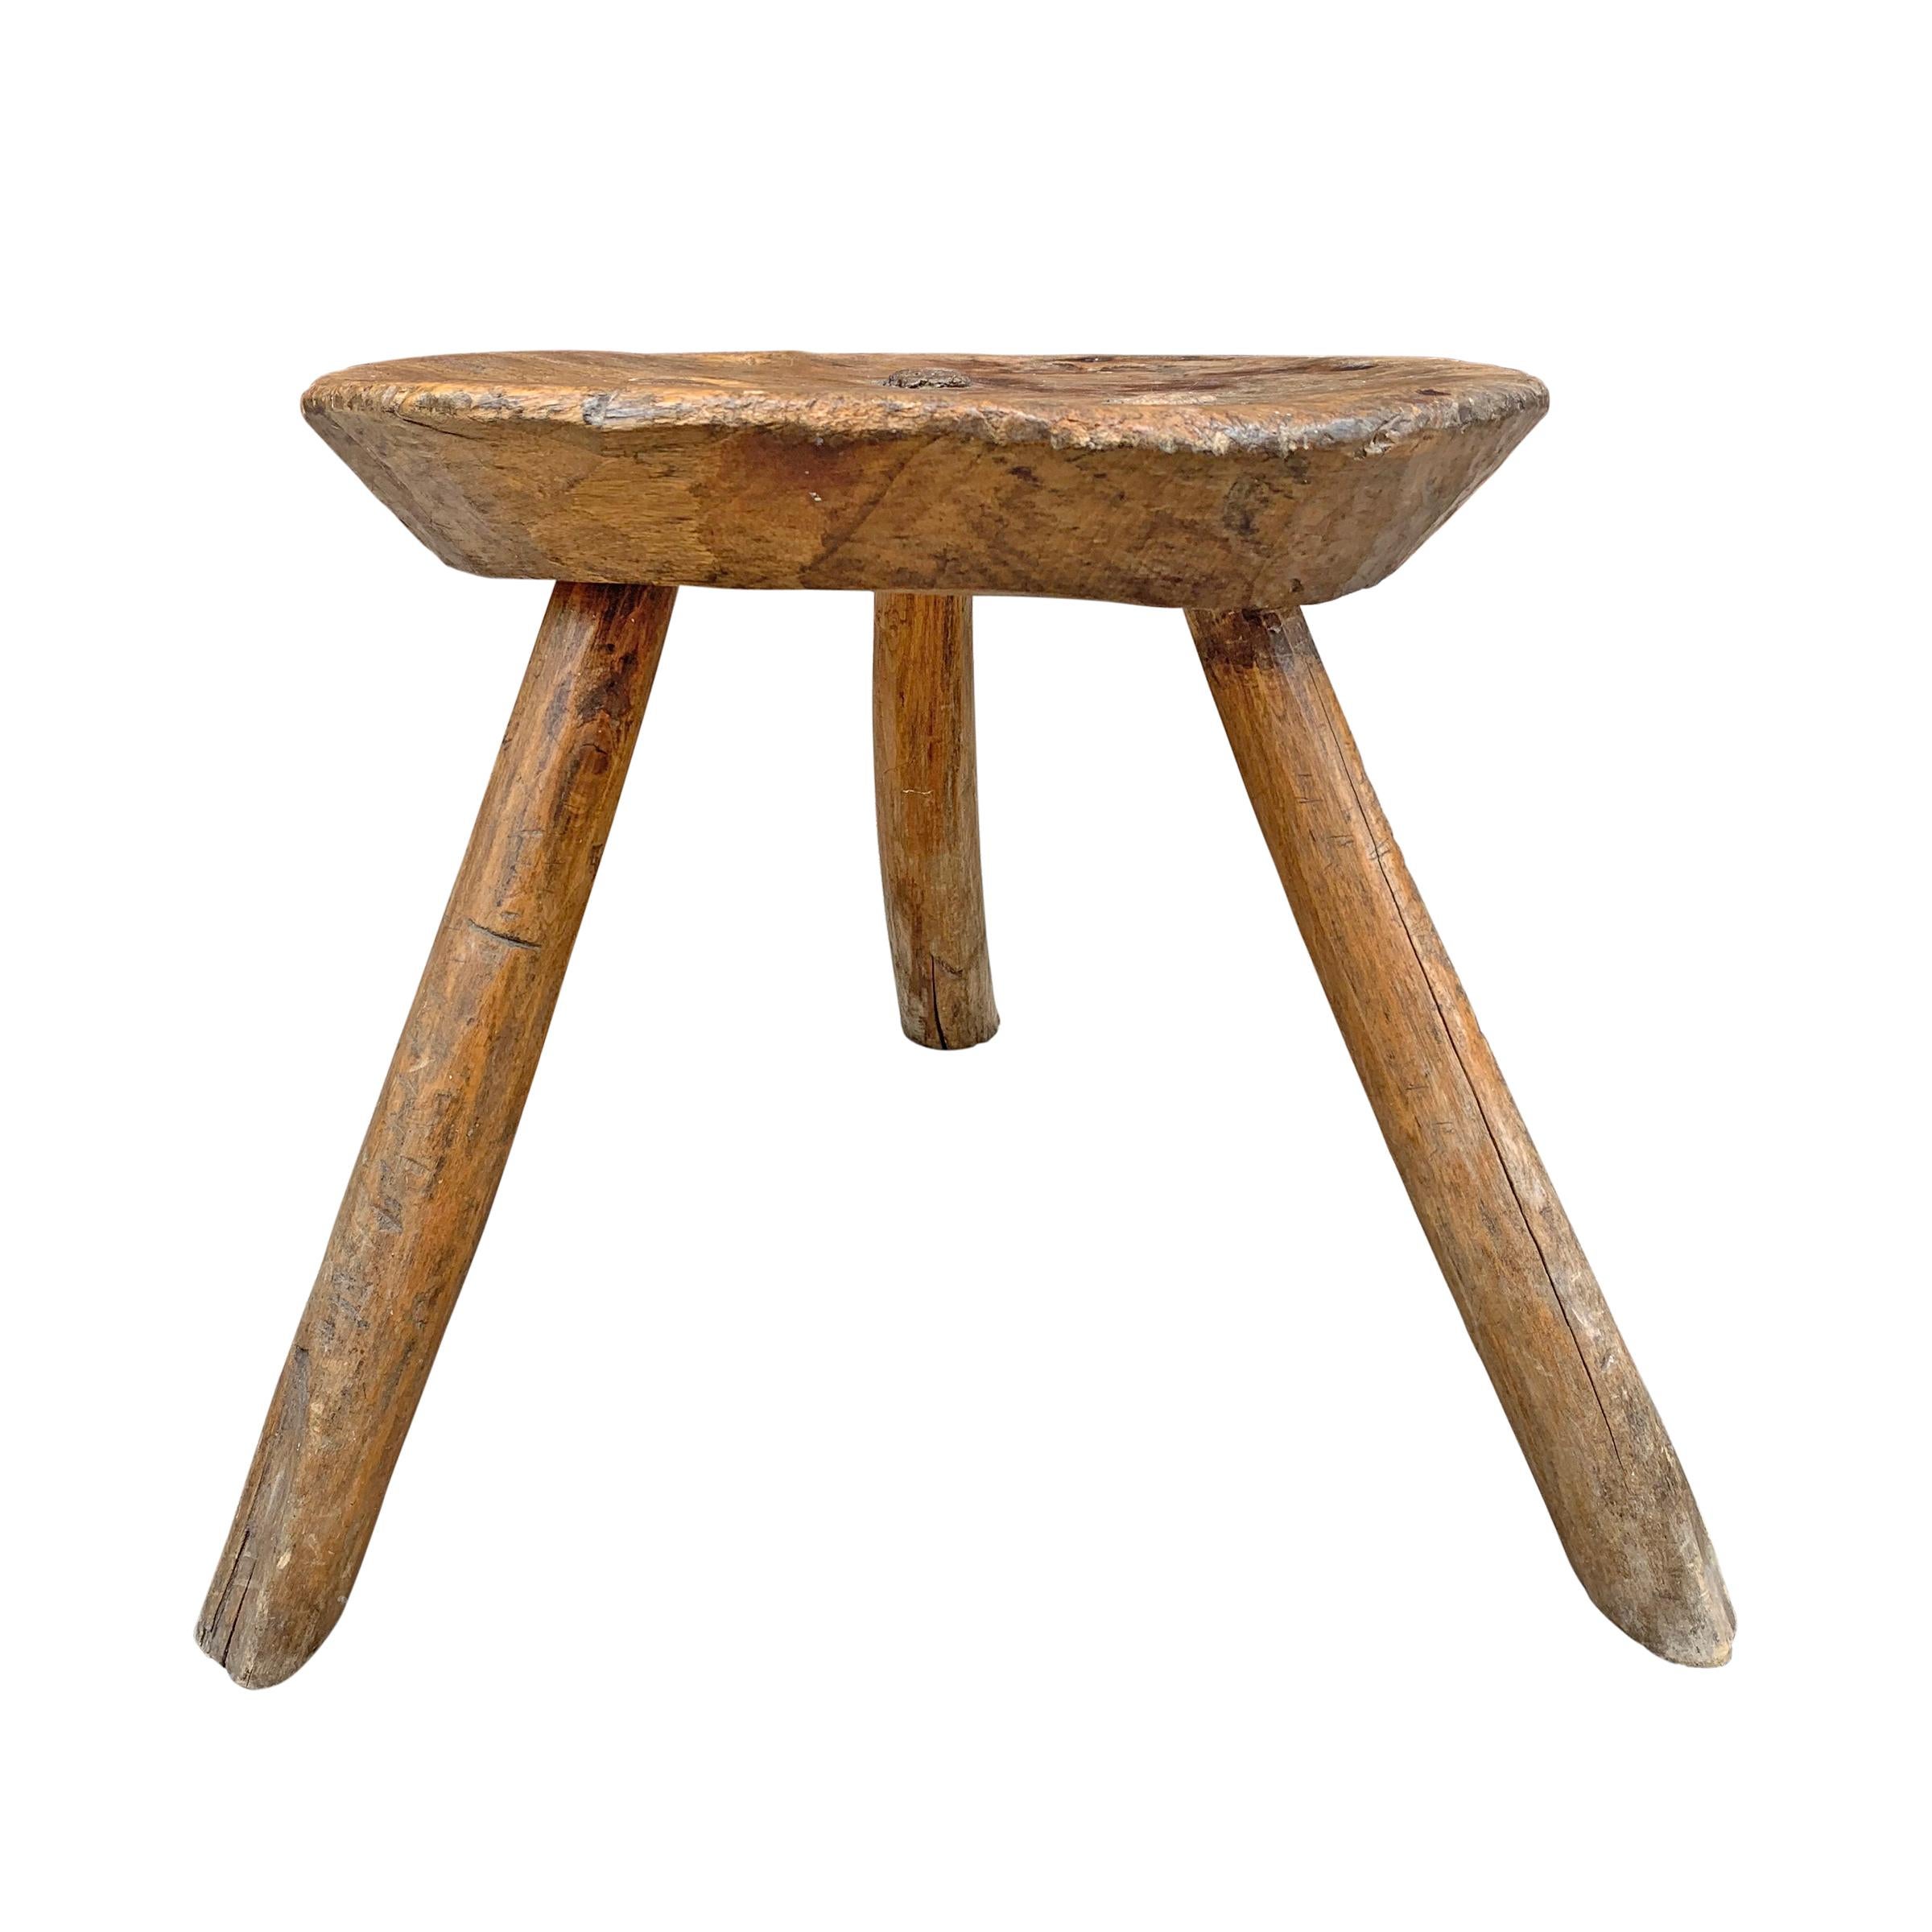 A fantastic sculptural 19th century primitive European milking stool with three splayed legs with through tenons, and a beautiful patina.